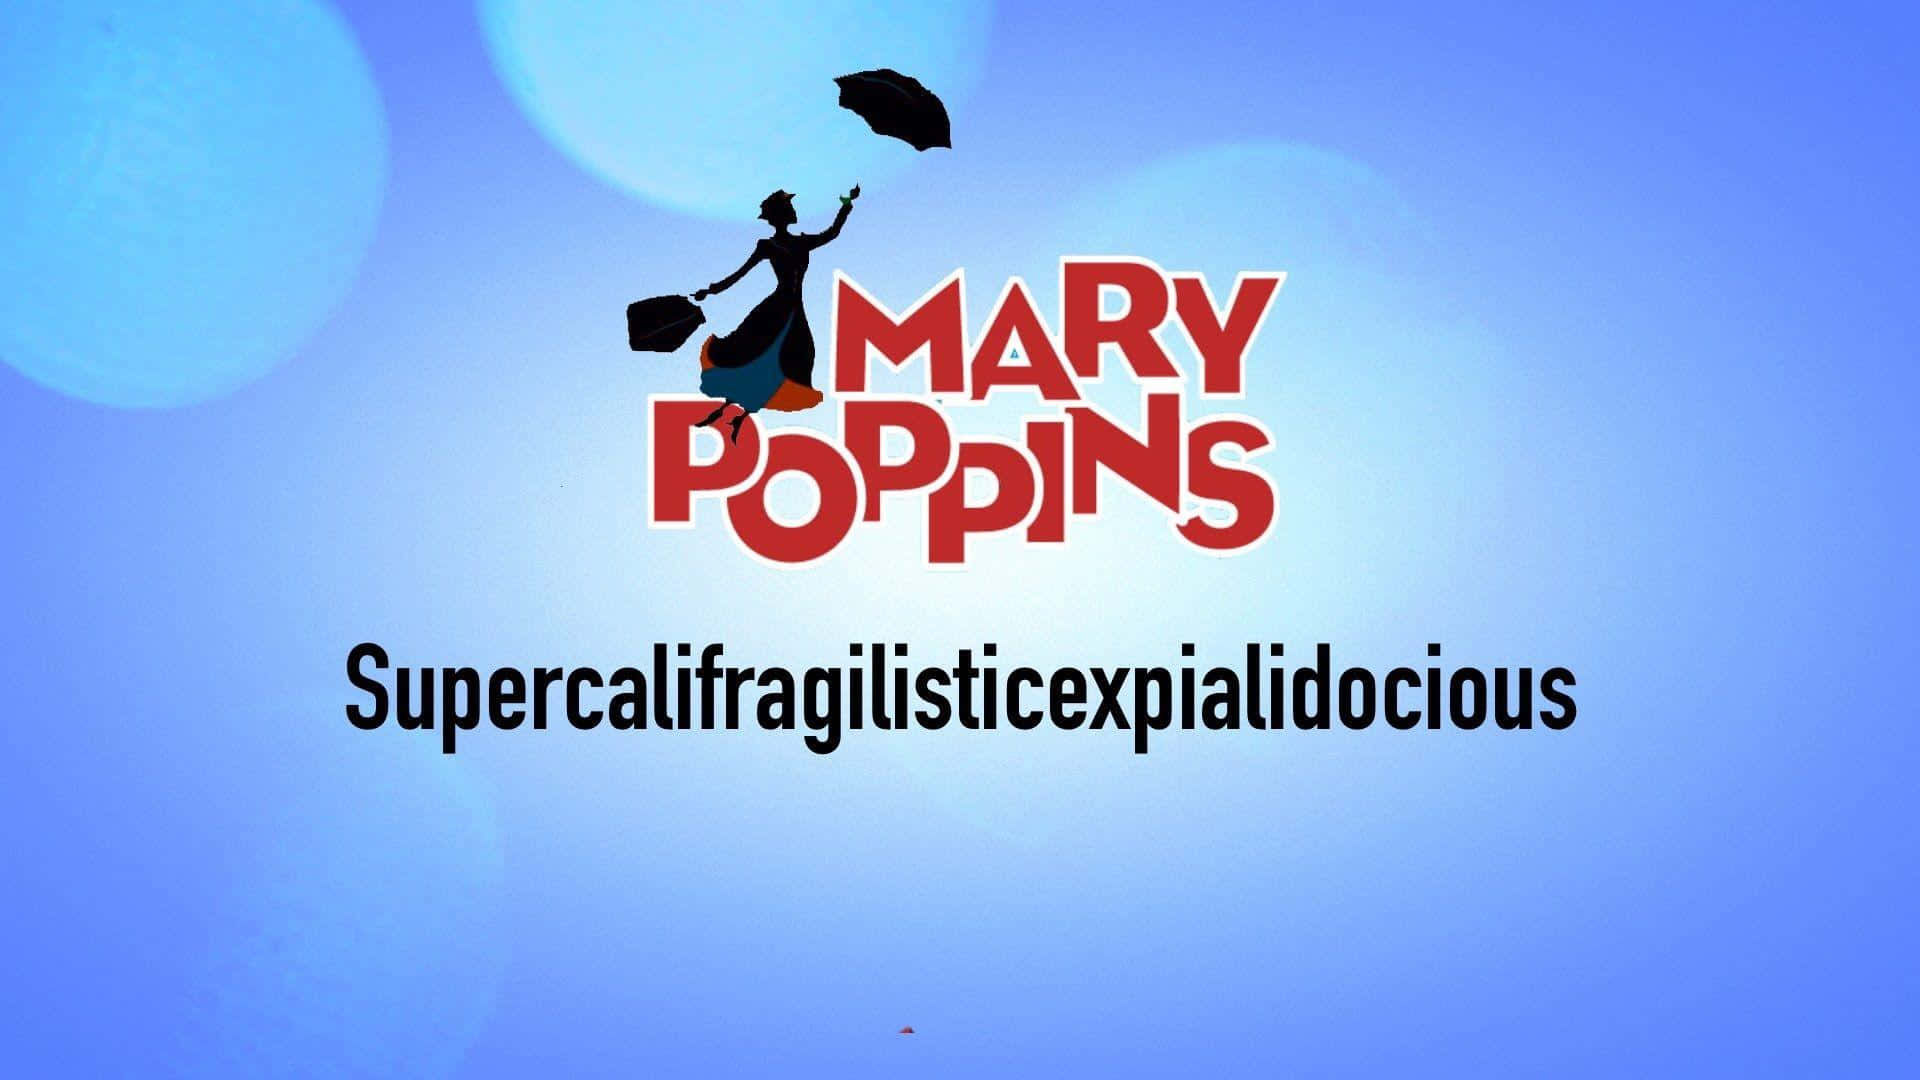 Mary Poppins Soars Over London Background